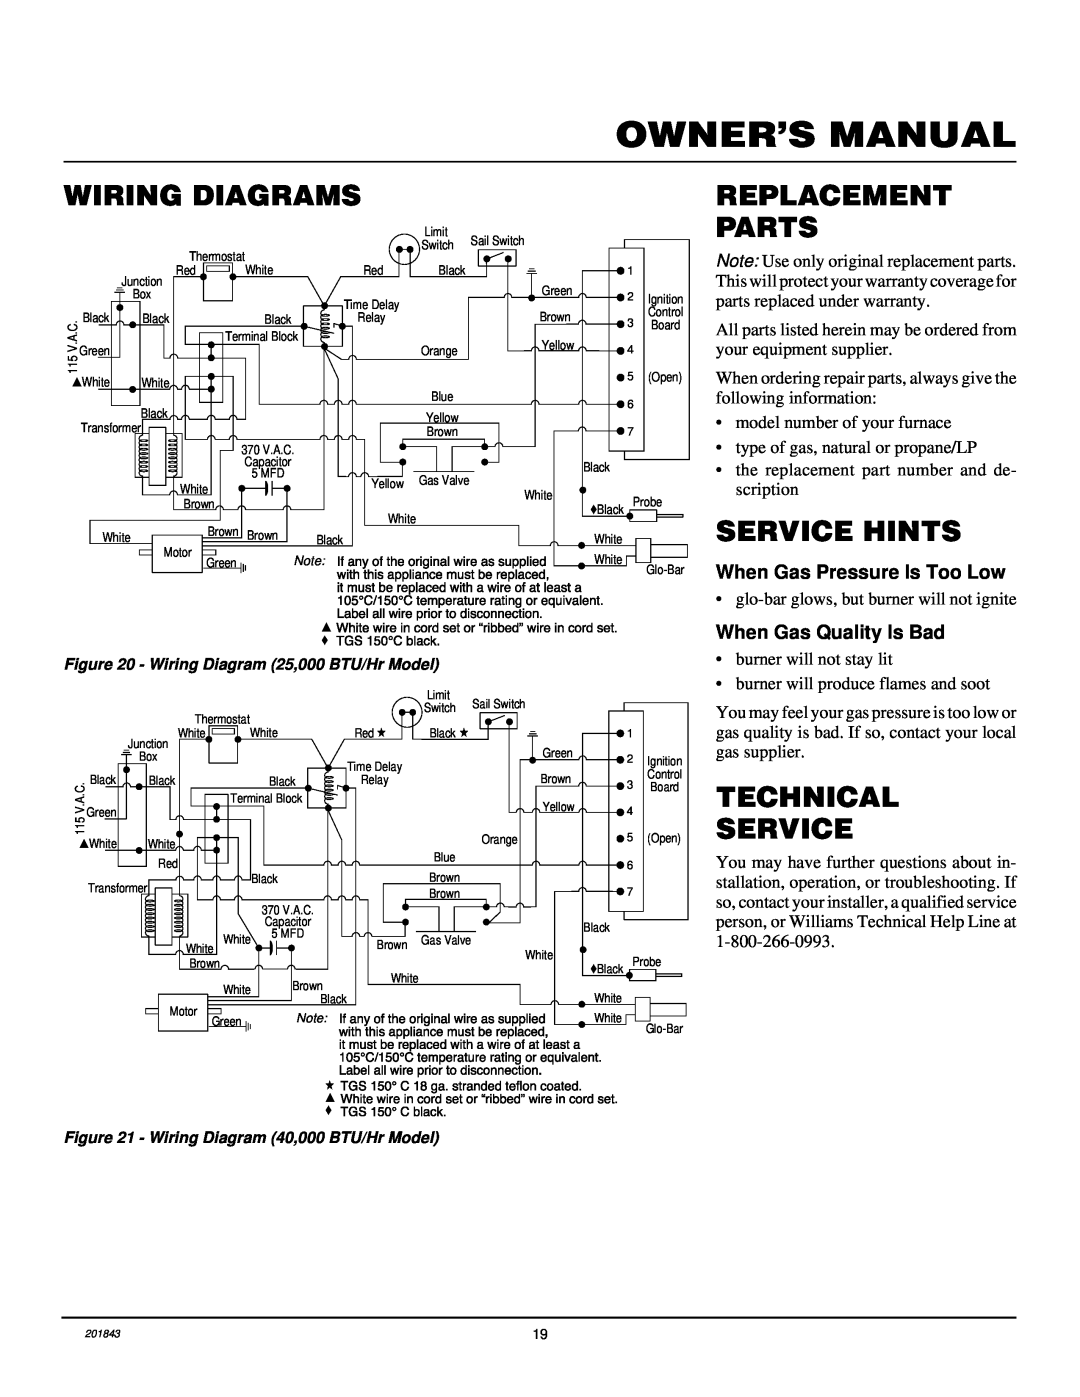 Williams 4003531 Wiring Diagrams, Replacement, Parts, Service Hints, Technical Service, When Gas Pressure Is Too Low 